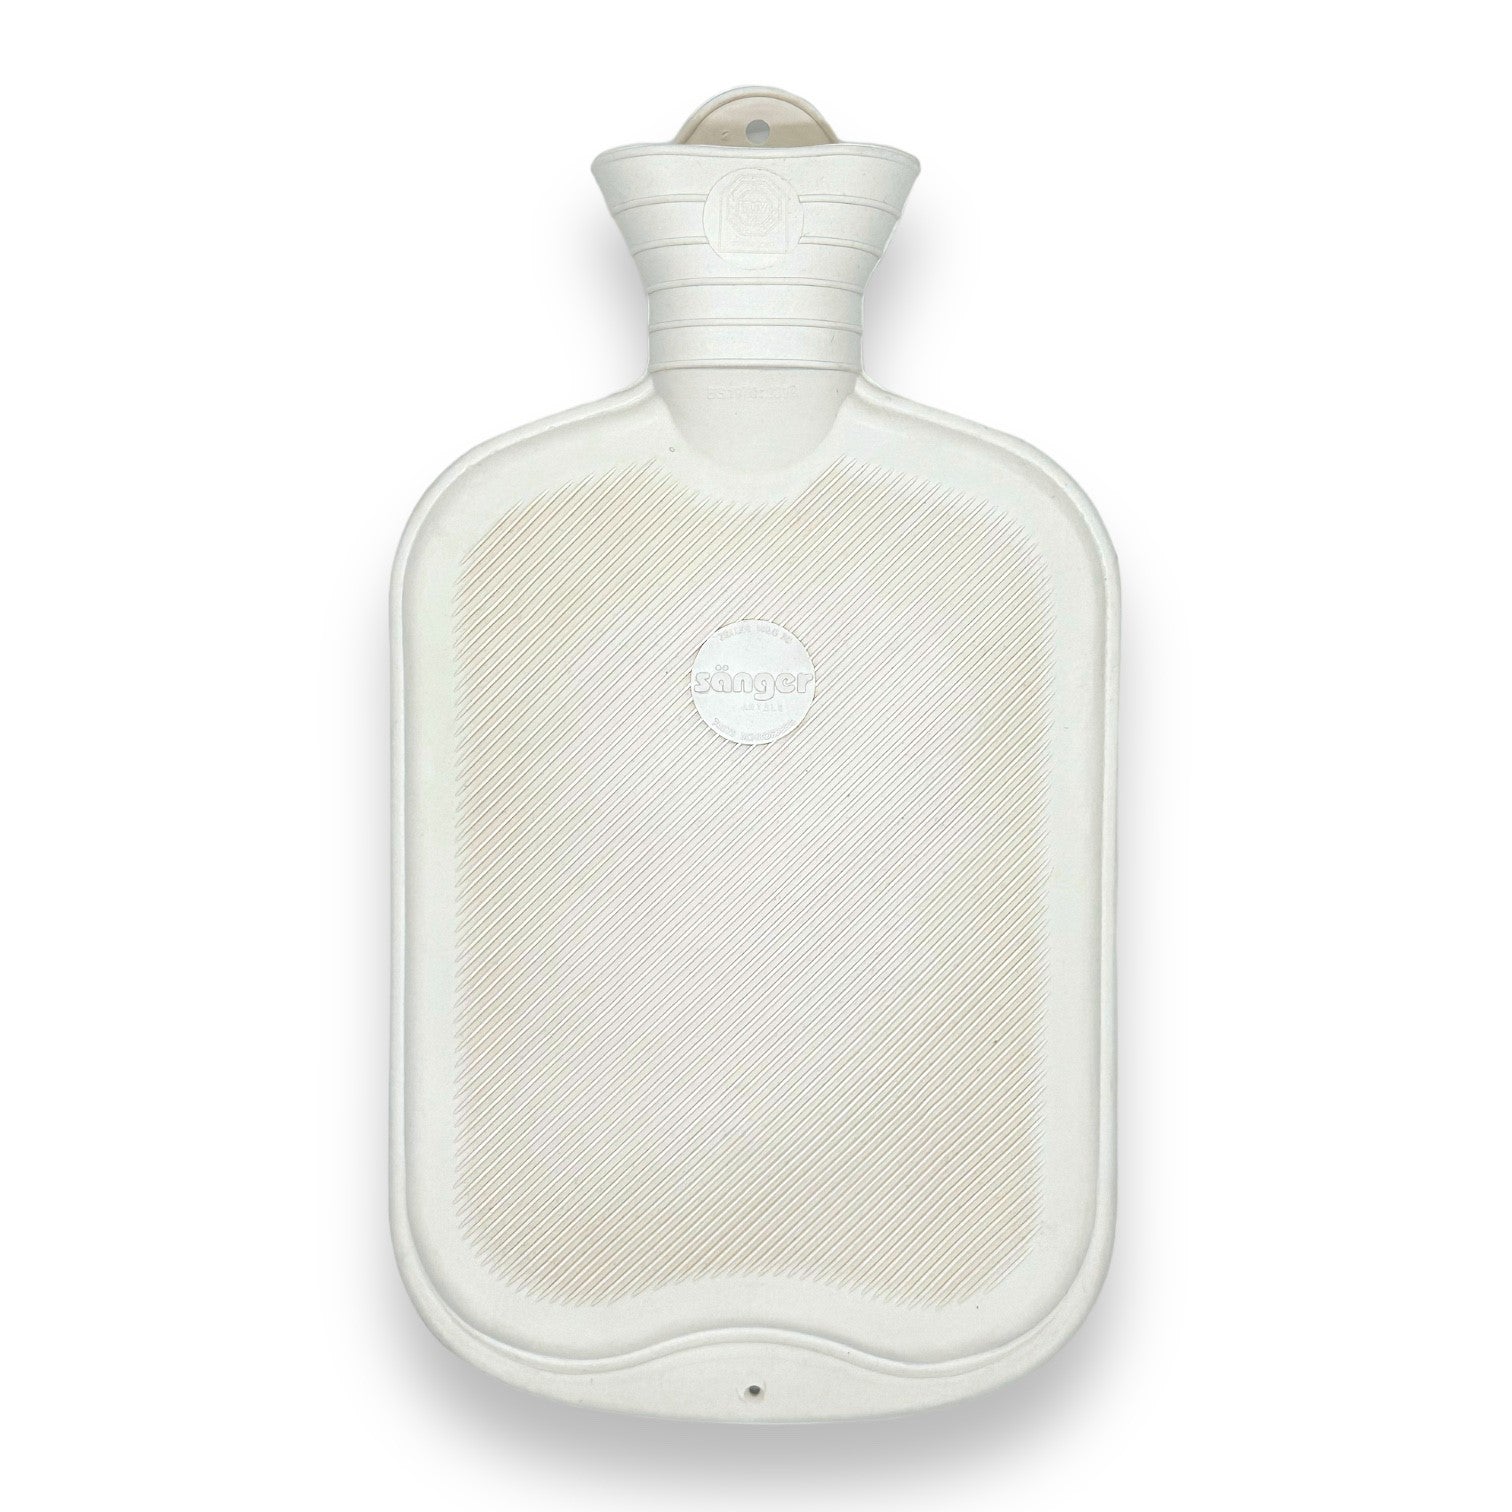 Buy Sänger Rubber Hot Water Bottle Made in Germany 2 Litres white